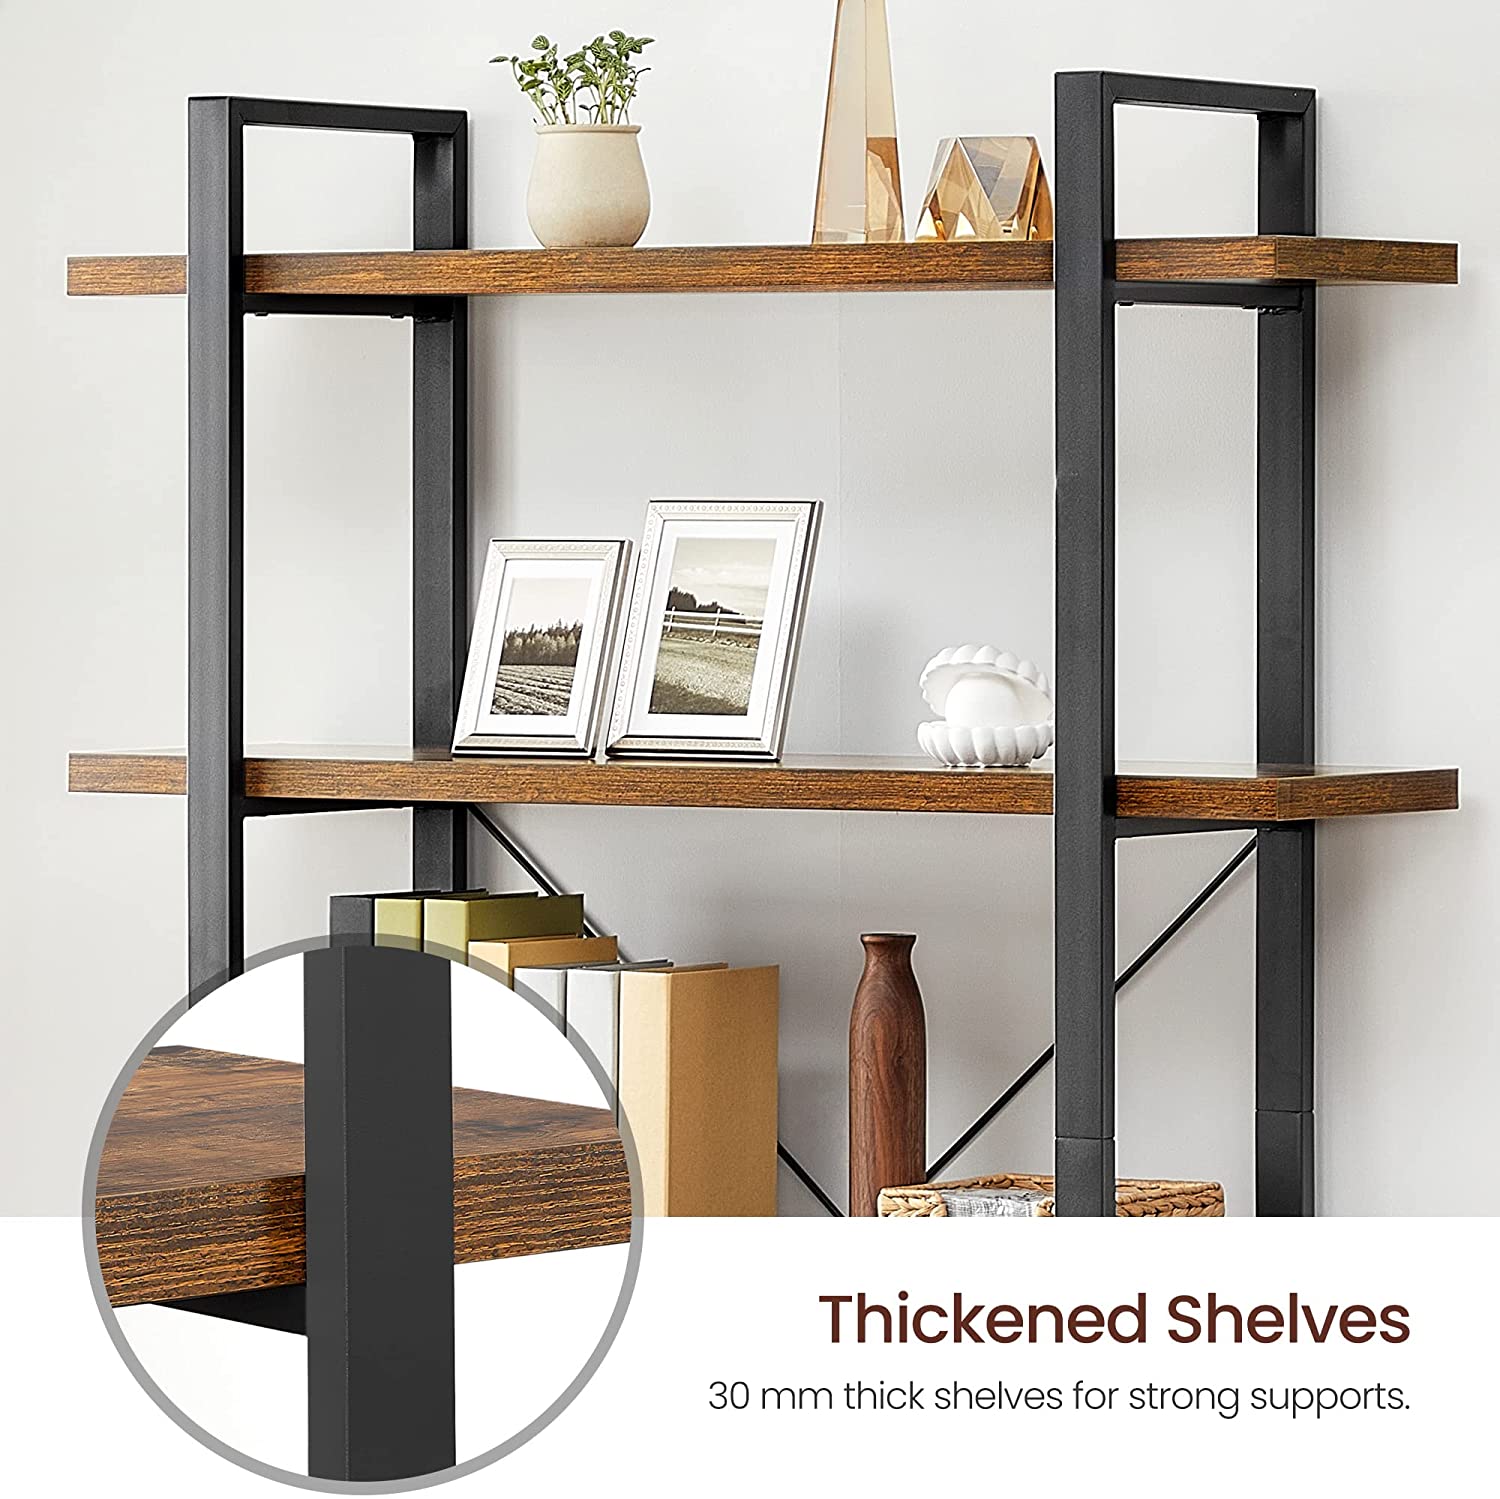 Bookshelf 5-Tier Industrial Stable Bookcase Rustic Brown and Black - image5